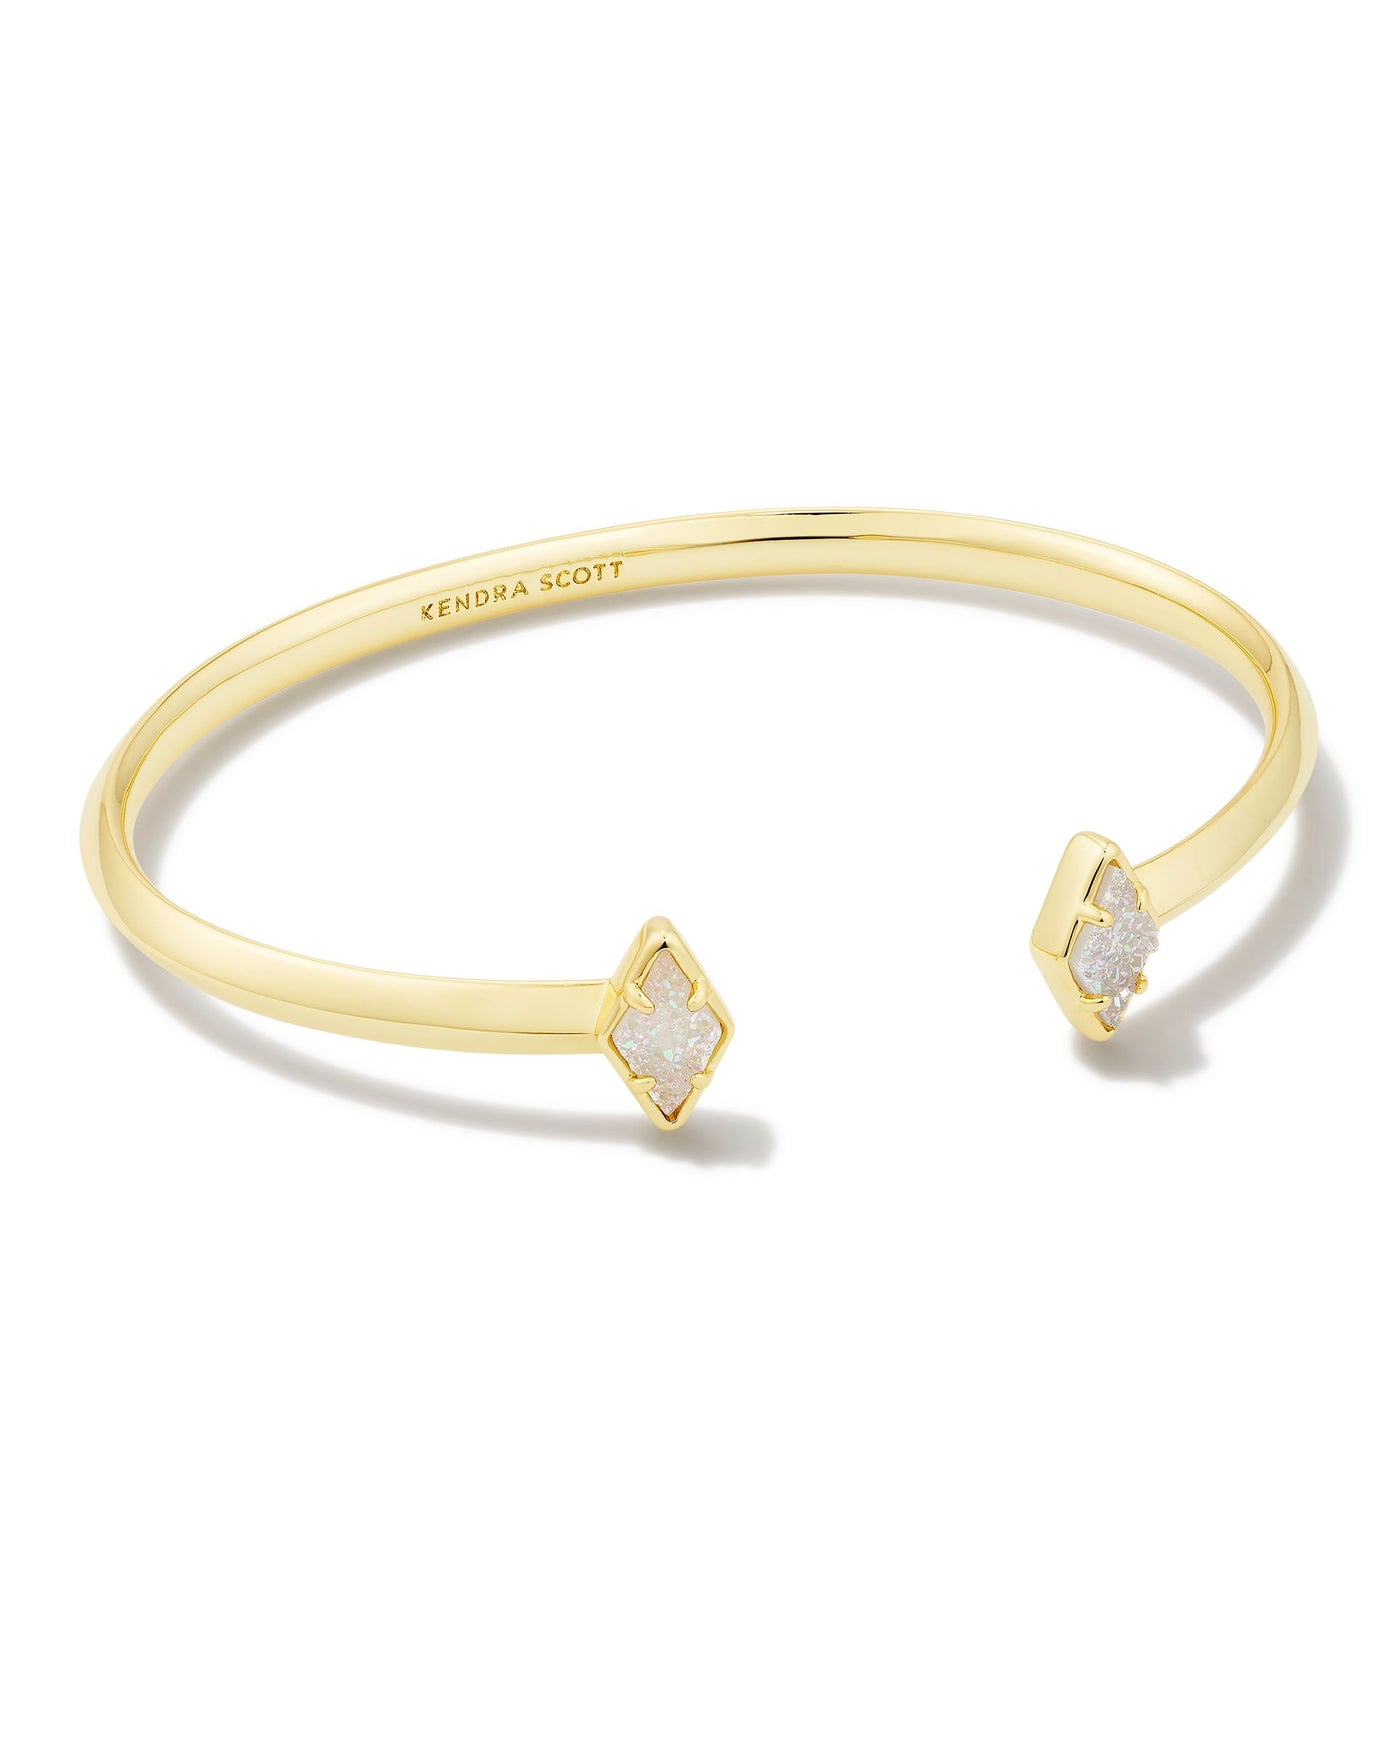 Kendra Scott Kinsley Cuff Bracelet in Gold Iridescent Drusy-Bracelets-Kendra Scott-Market Street Nest, Fashionable Clothing, Shoes and Home Décor Located in Mabank, TX